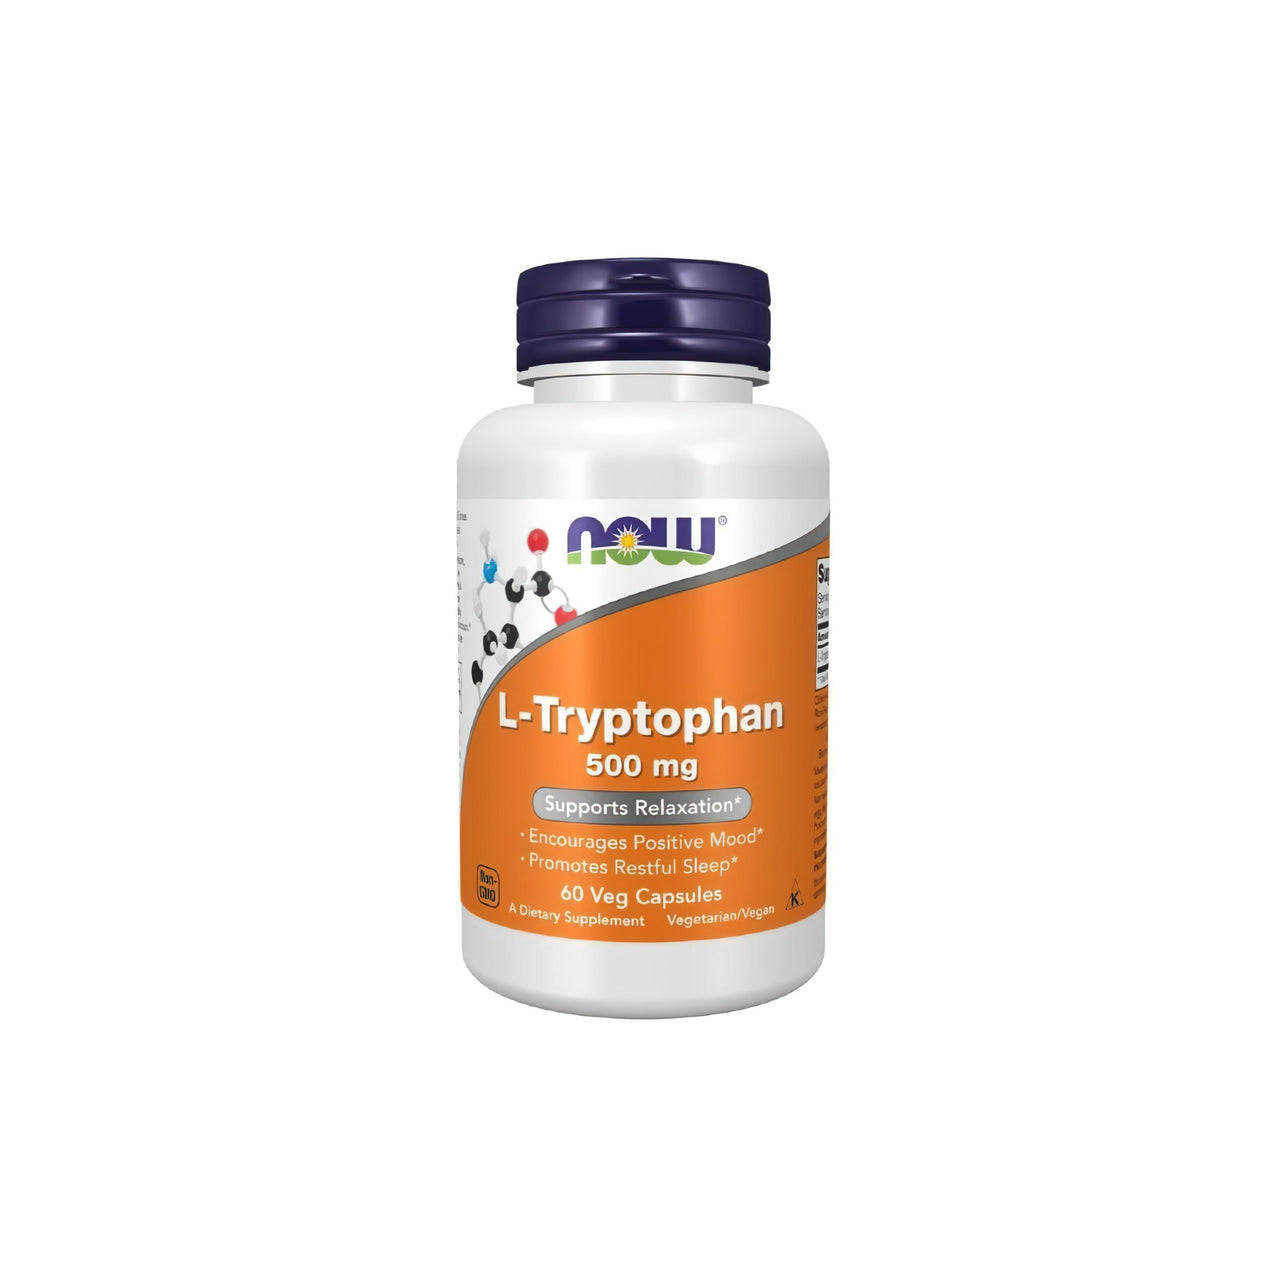 A bottle of Now Foods L-Tryptophan 500 mg 60 Vegetable Capsules, a supplement for relaxation and stress reduction, promoting healthy sleep patterns.